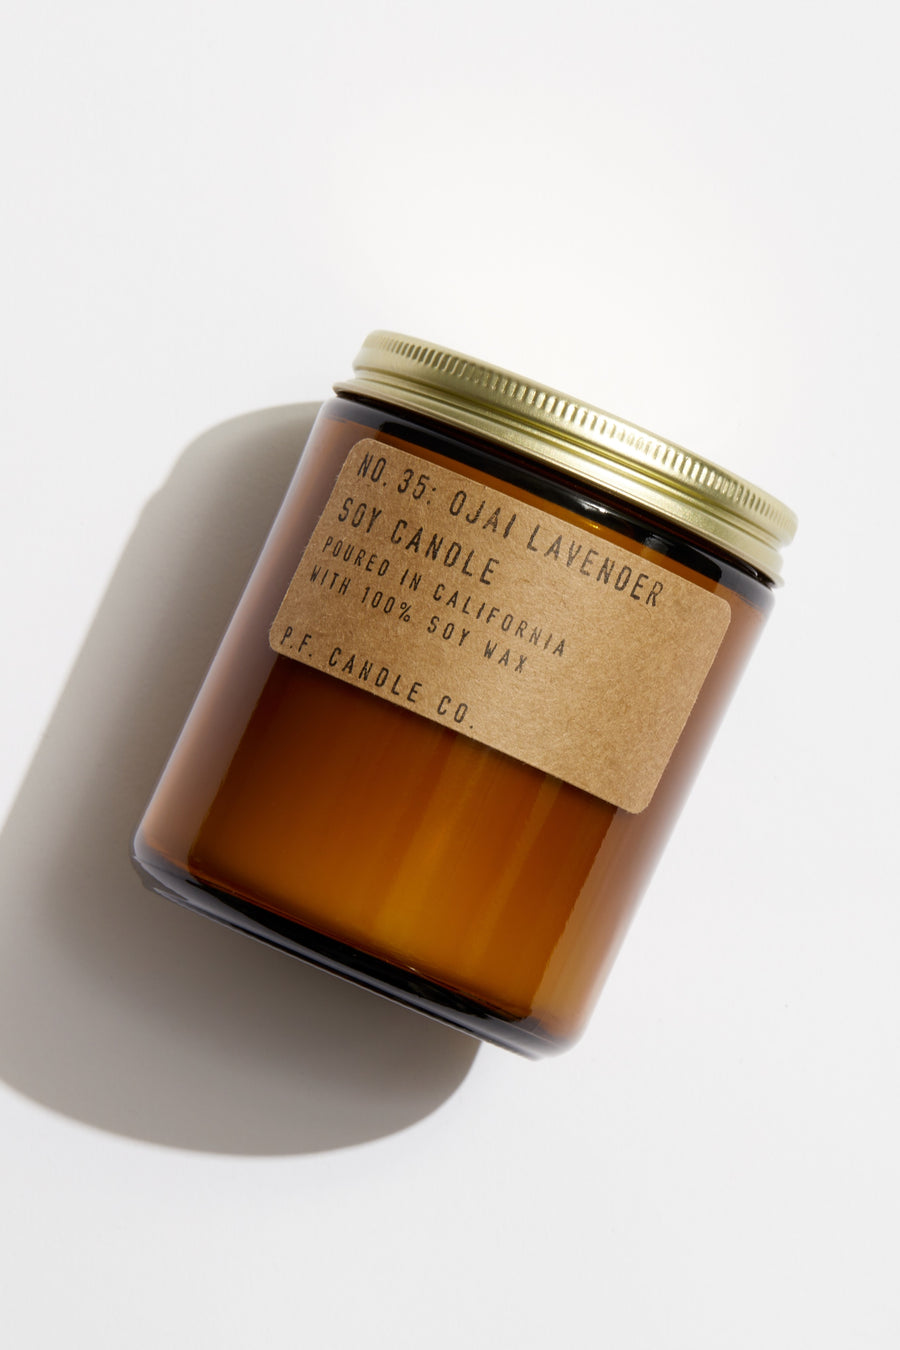 P.F. Candle Co. Standard Soy Candle - Ojai Lavender